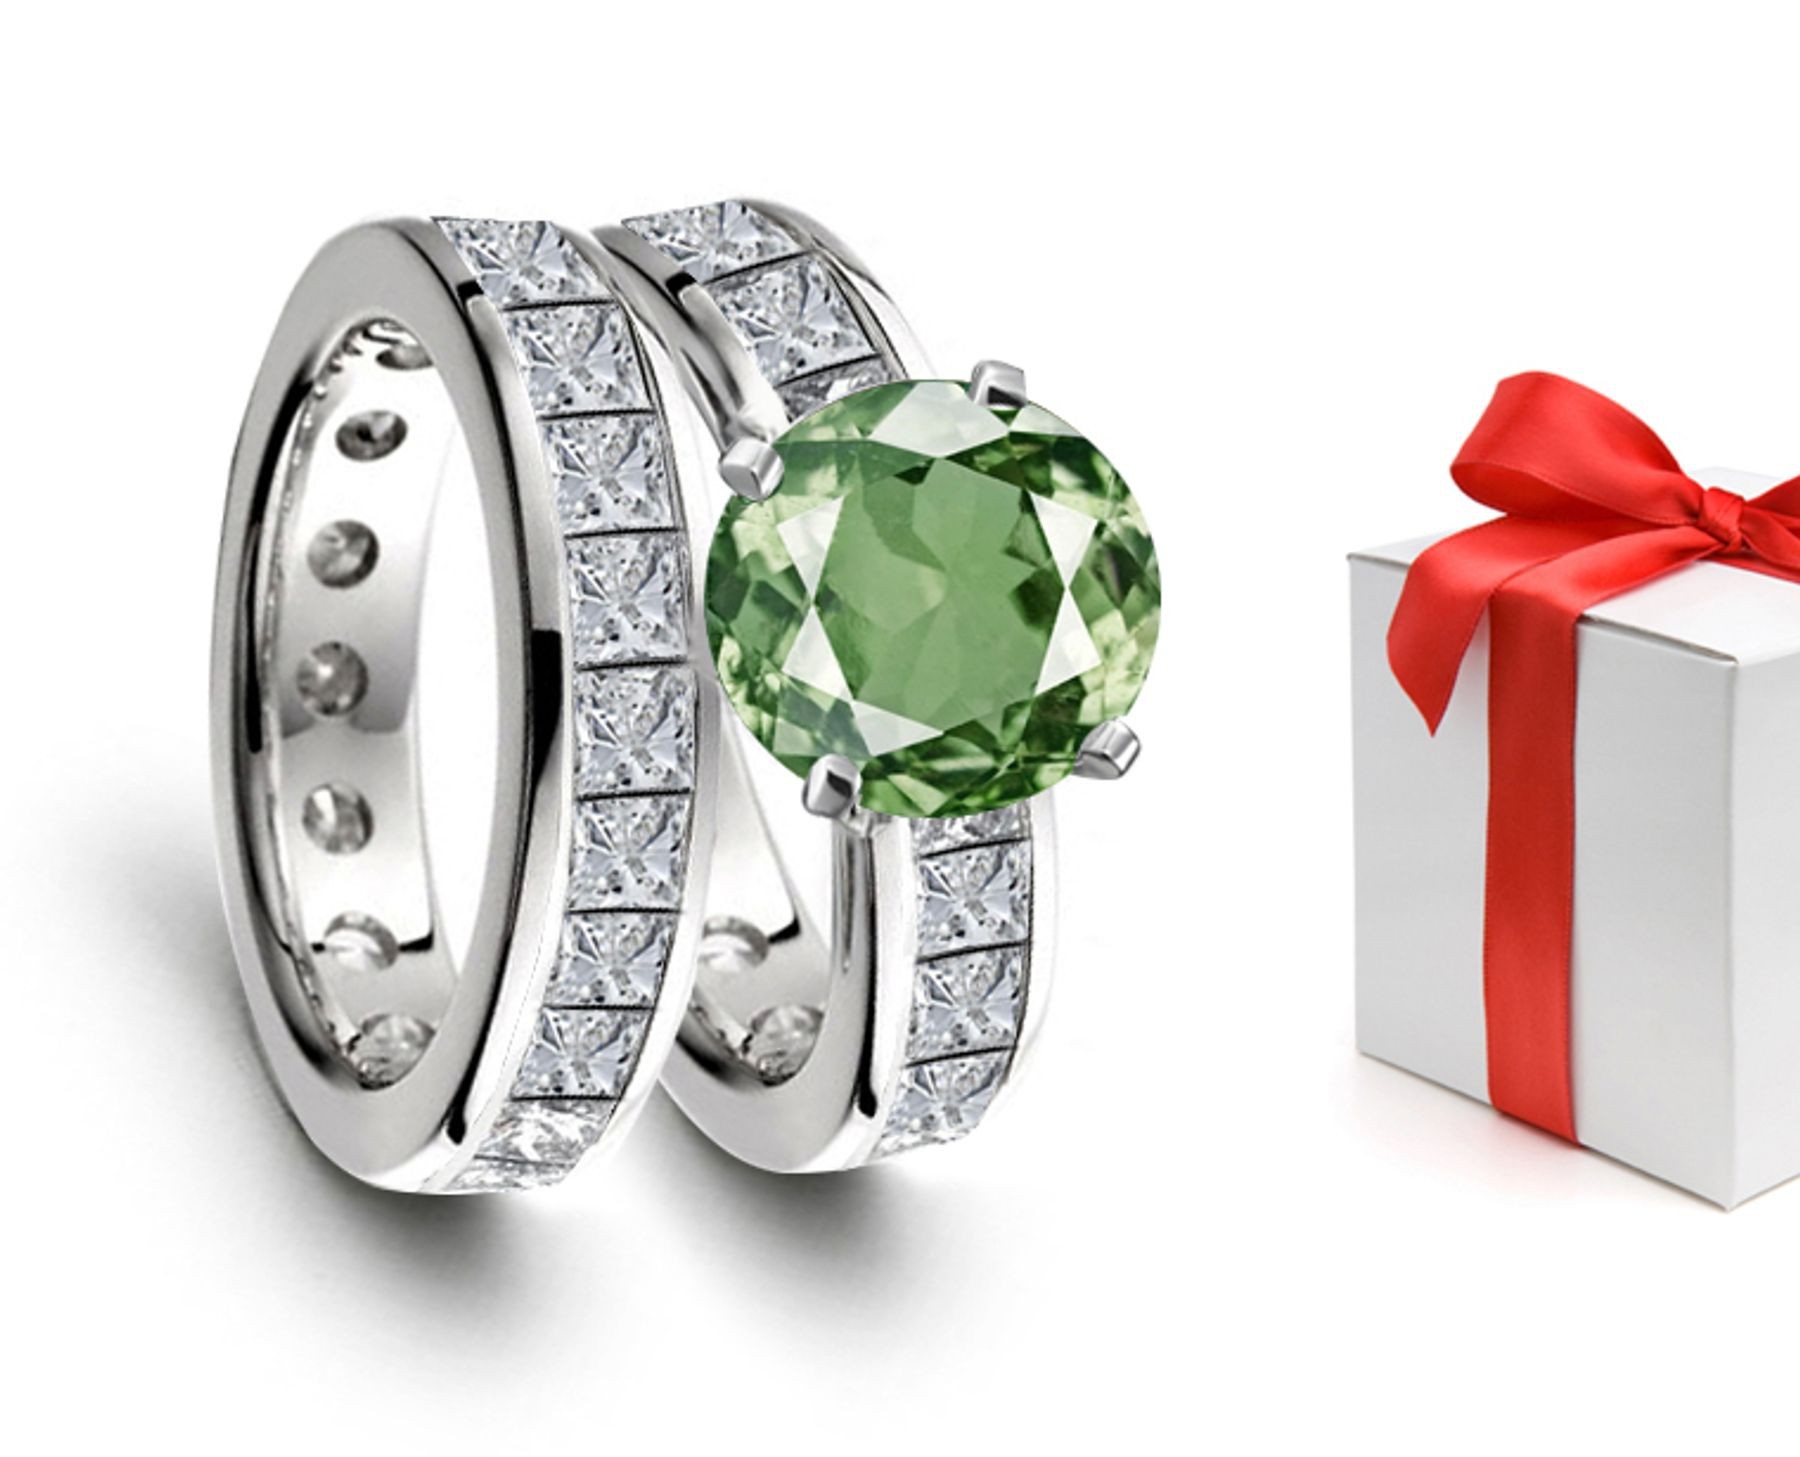 2013 Catalog No. 5 - Product Details: Love Stories: Green Sapphire & Diamond Engagement Wedding Rings